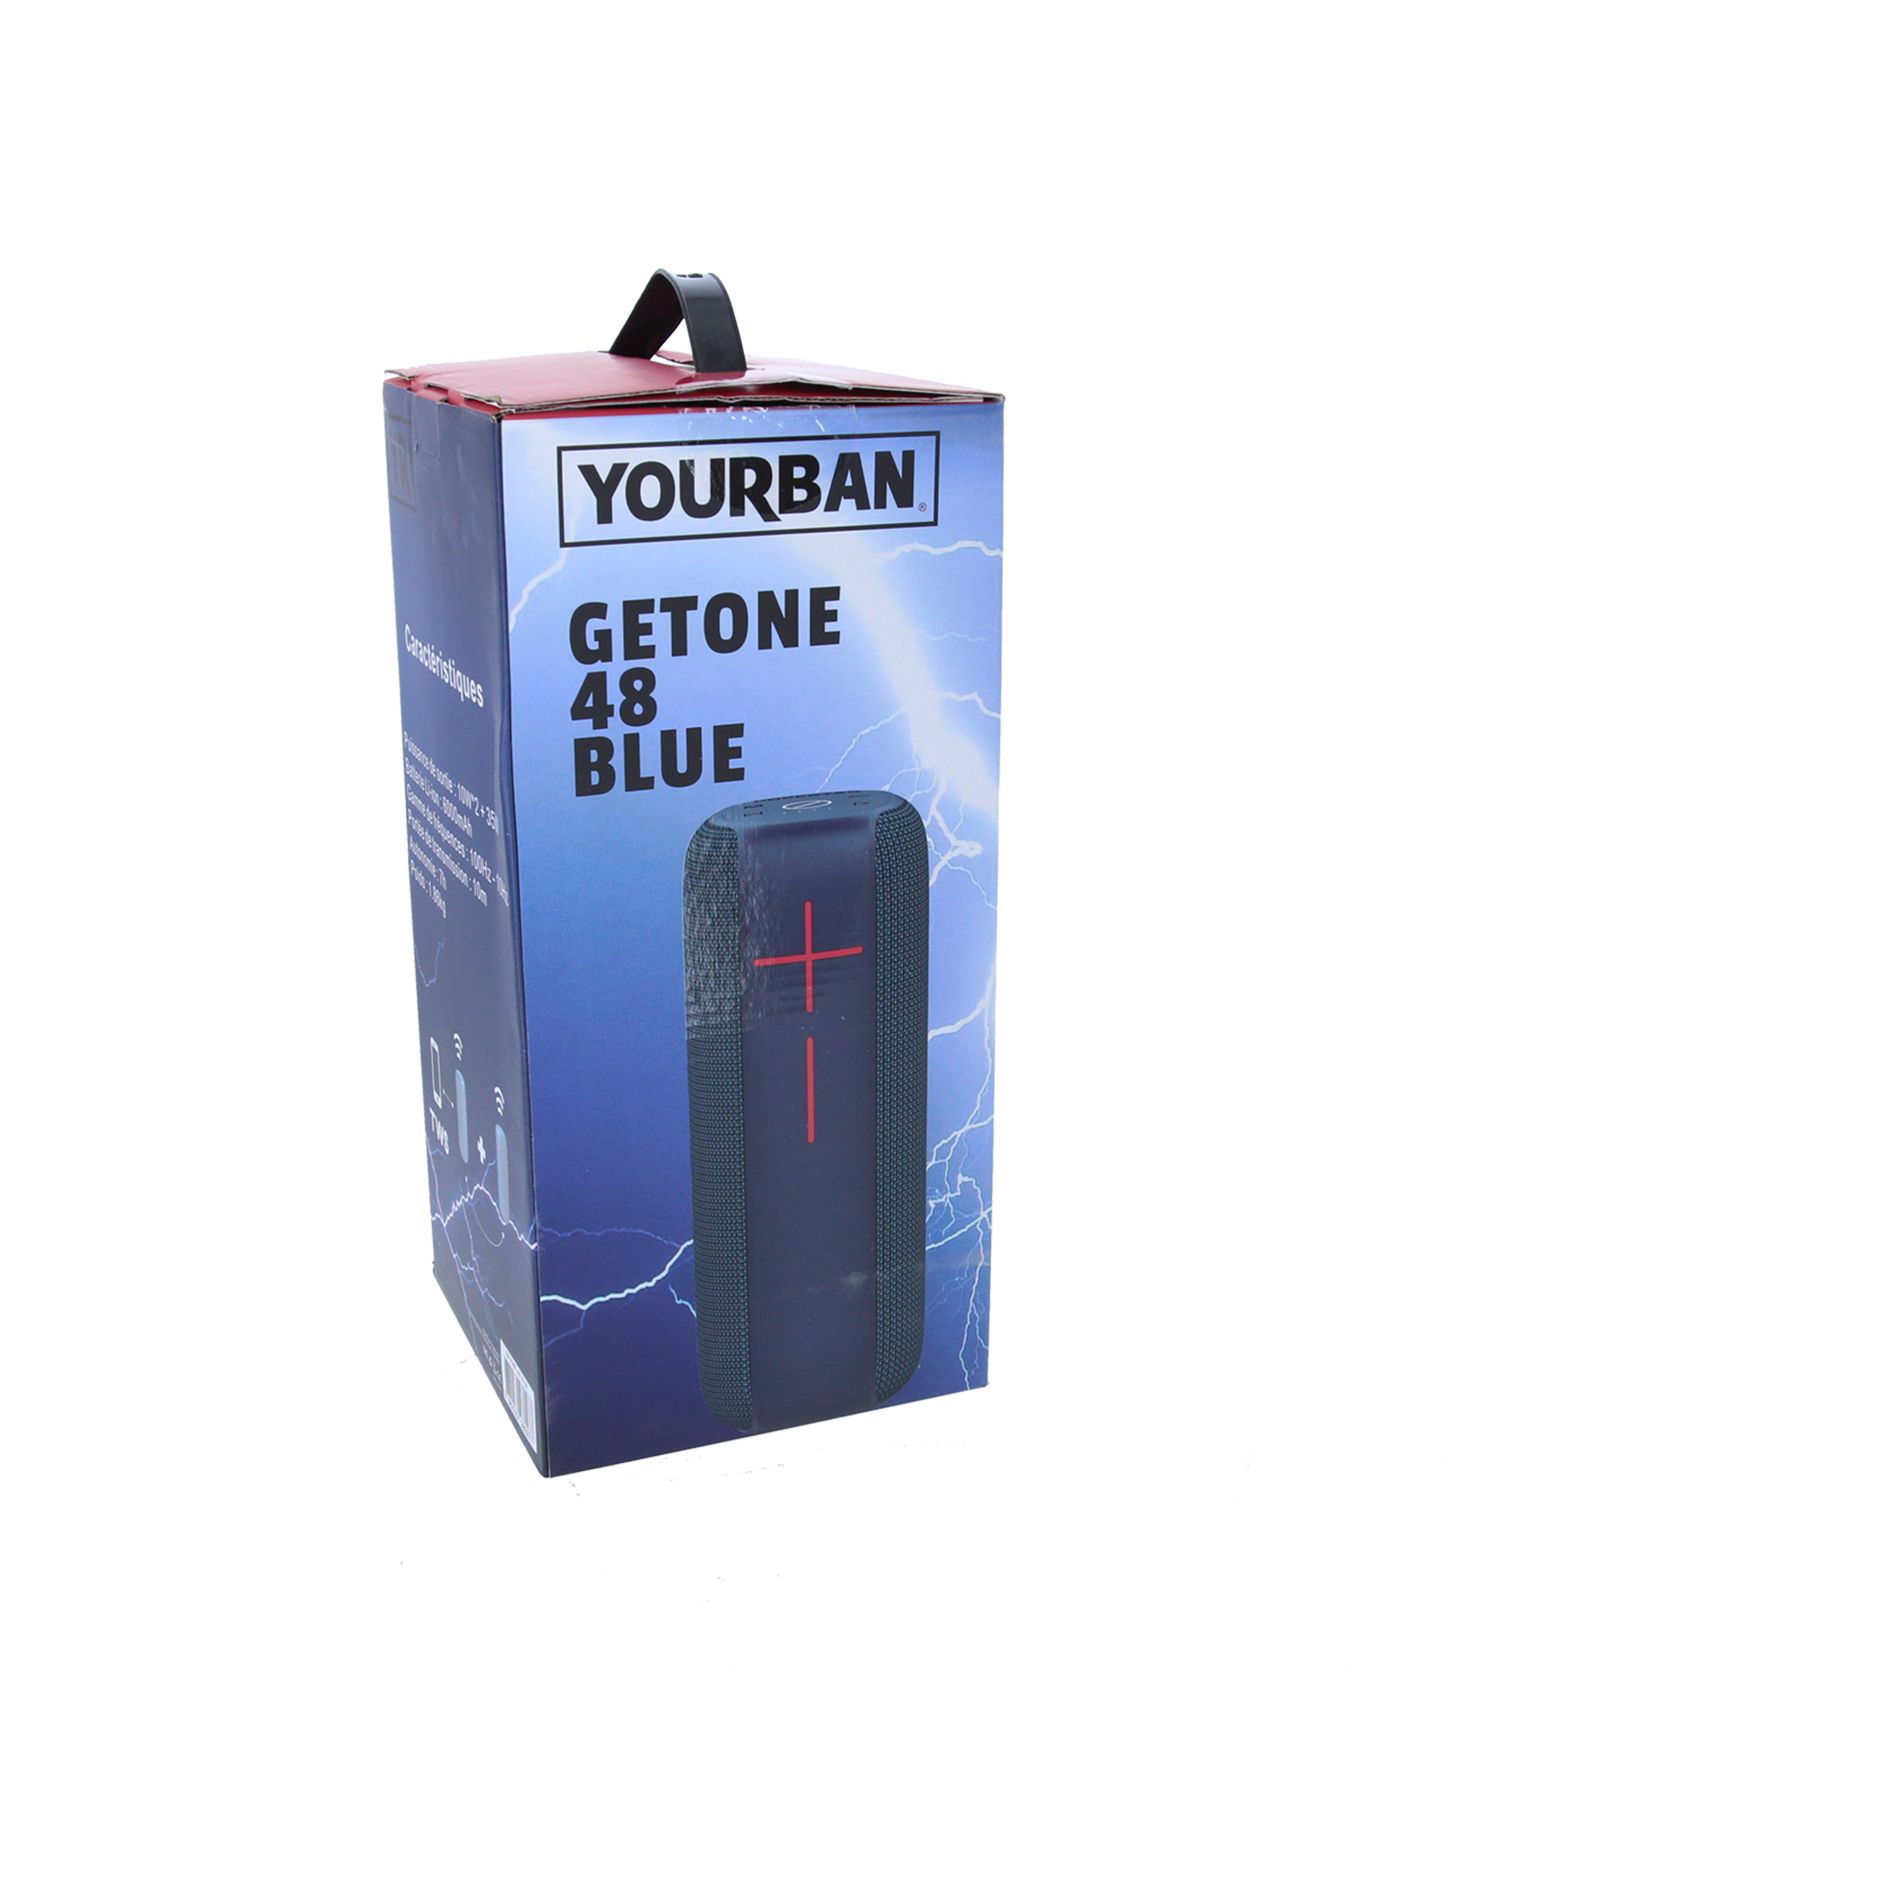 Yourban Getone 48 Blue - Mobile PA-Systeme - Variation 5